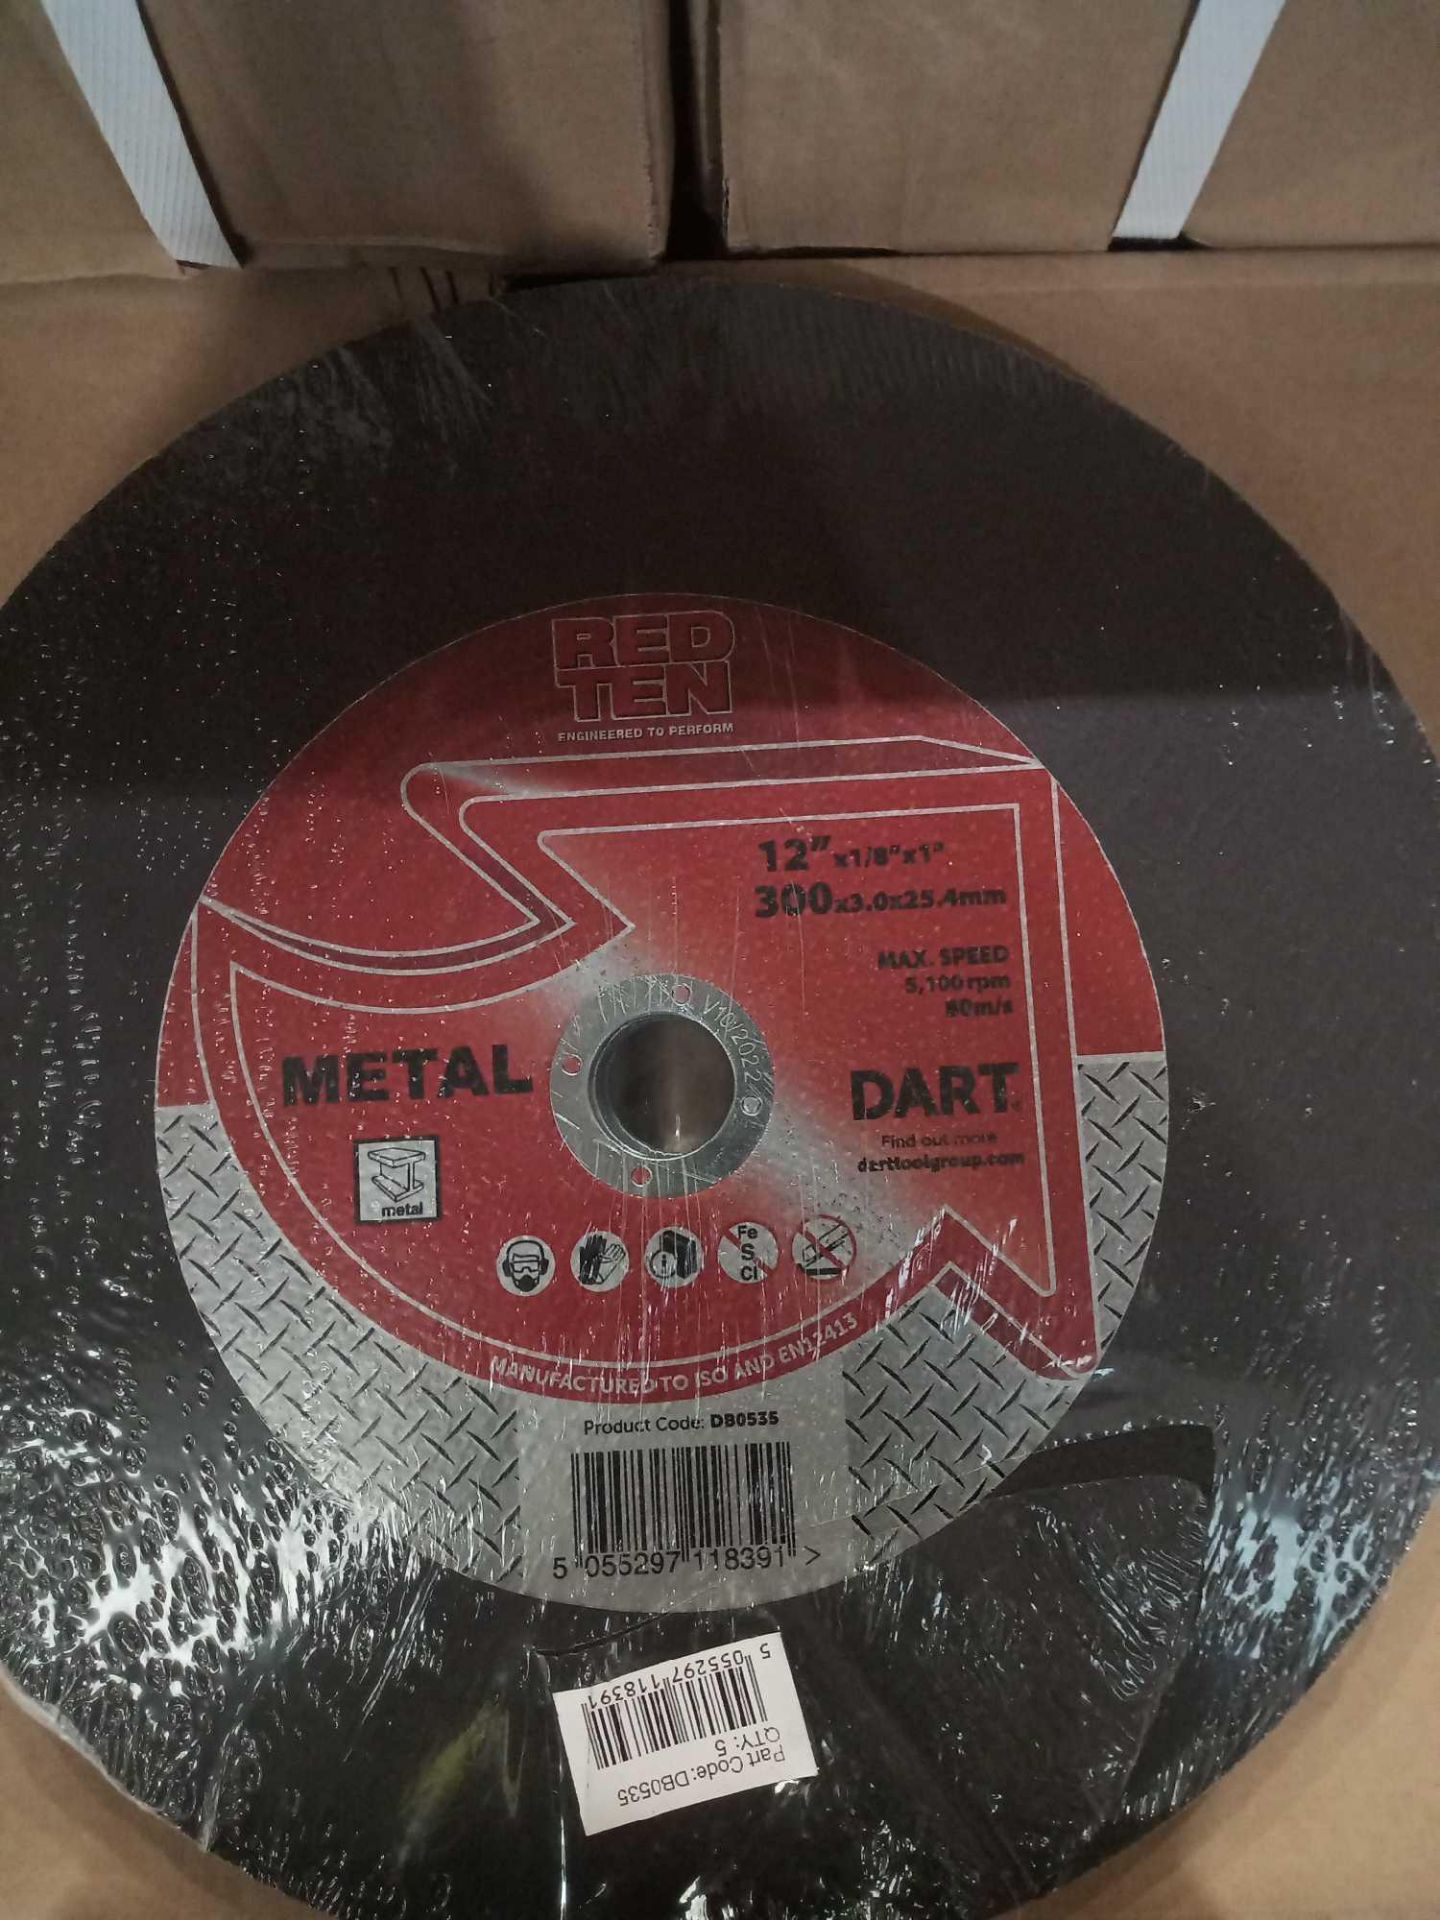 RRP £150 Box To Contain 25 Brand New Dart Metal Db0535 Red Ten Abrasive Disks - Image 2 of 2